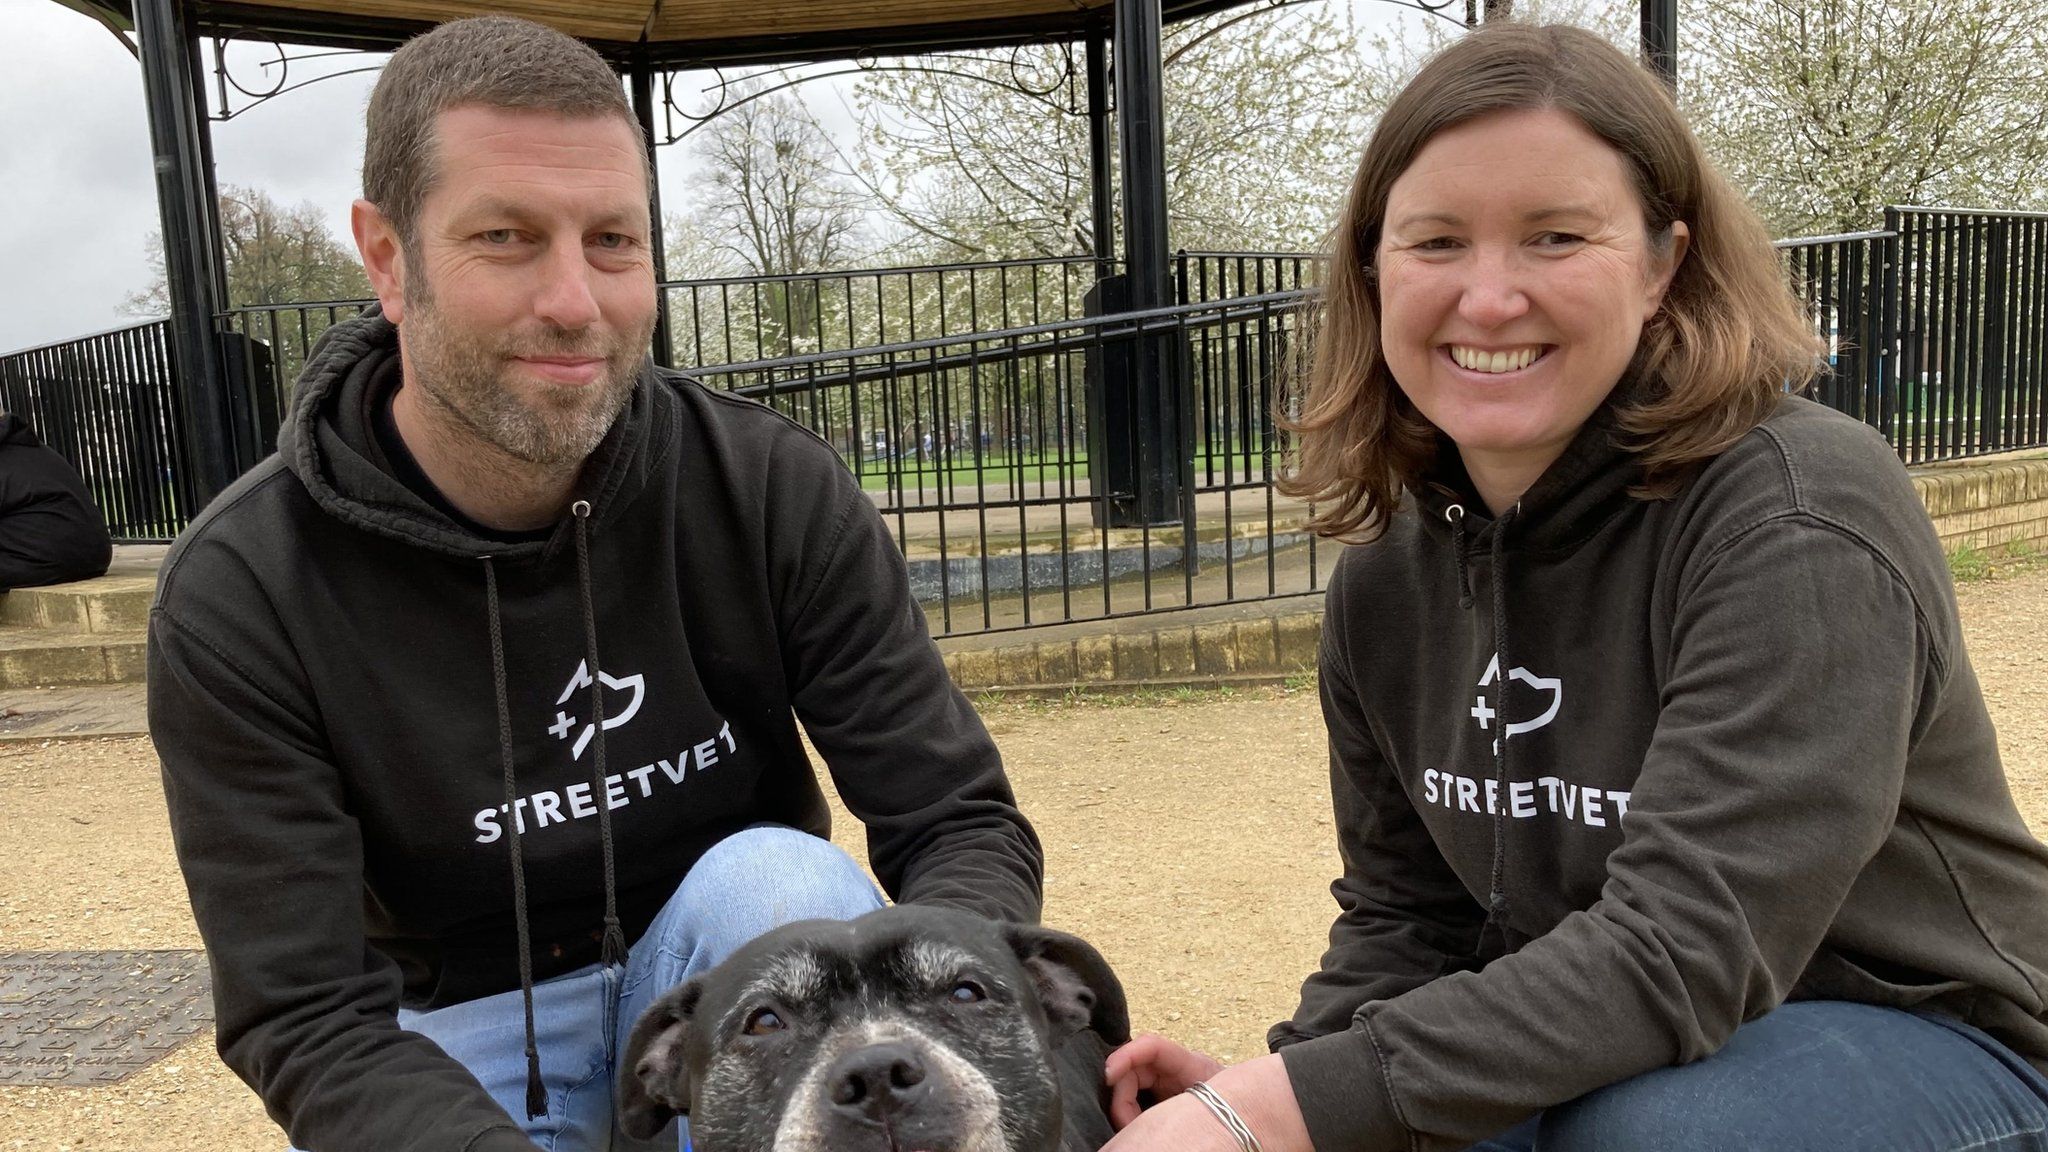 Two volunteer vets knelt down with a black Staffordshire bull terrier with its tongue poking out